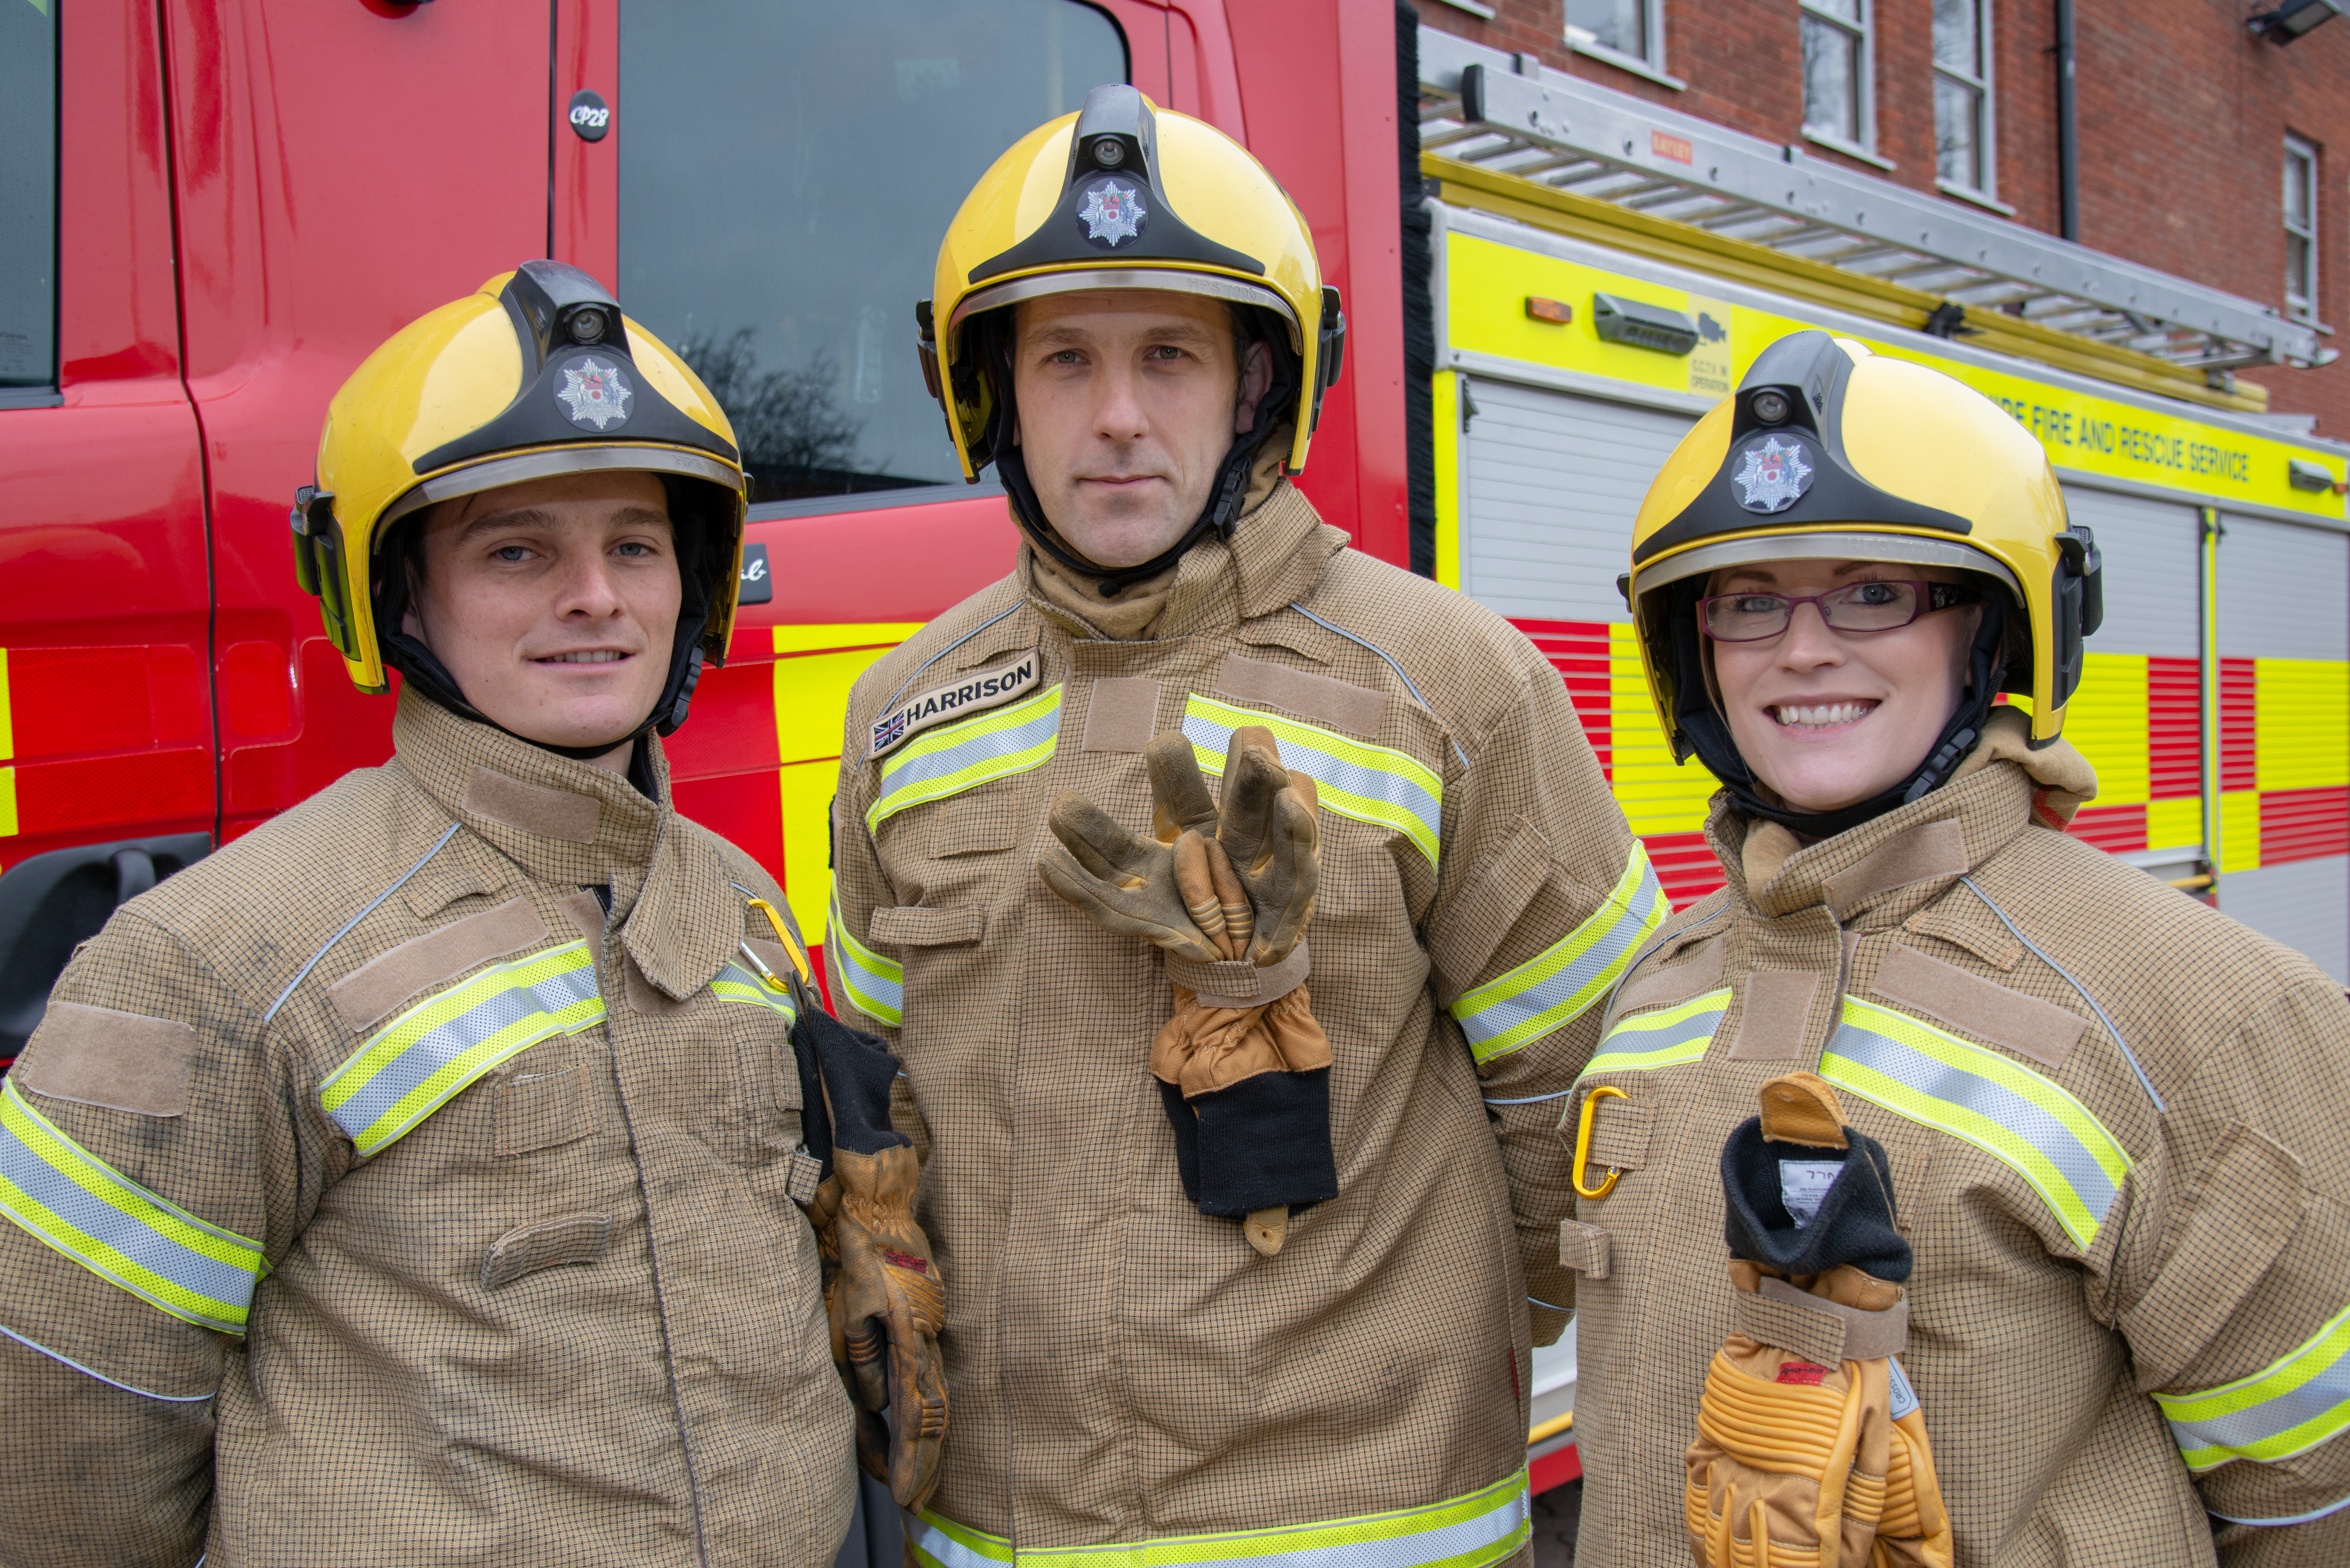 Recruitment campaign for on-call firefighters launched by Northamptonshire Fire and Rescue Service